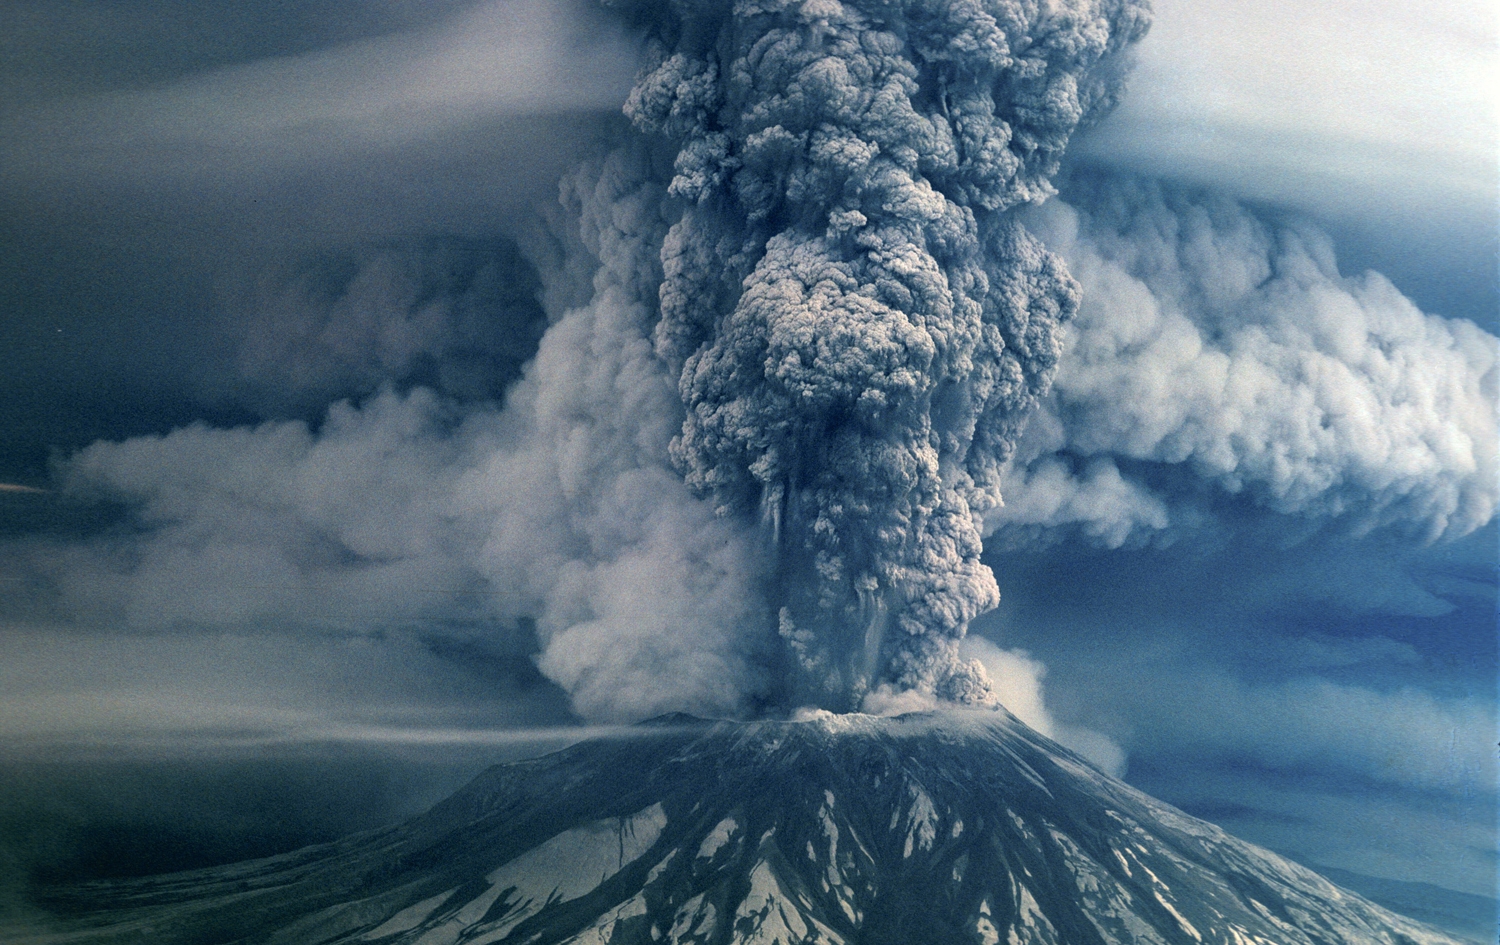 when did mount st helens in washington state erupt and how long did the eruption last